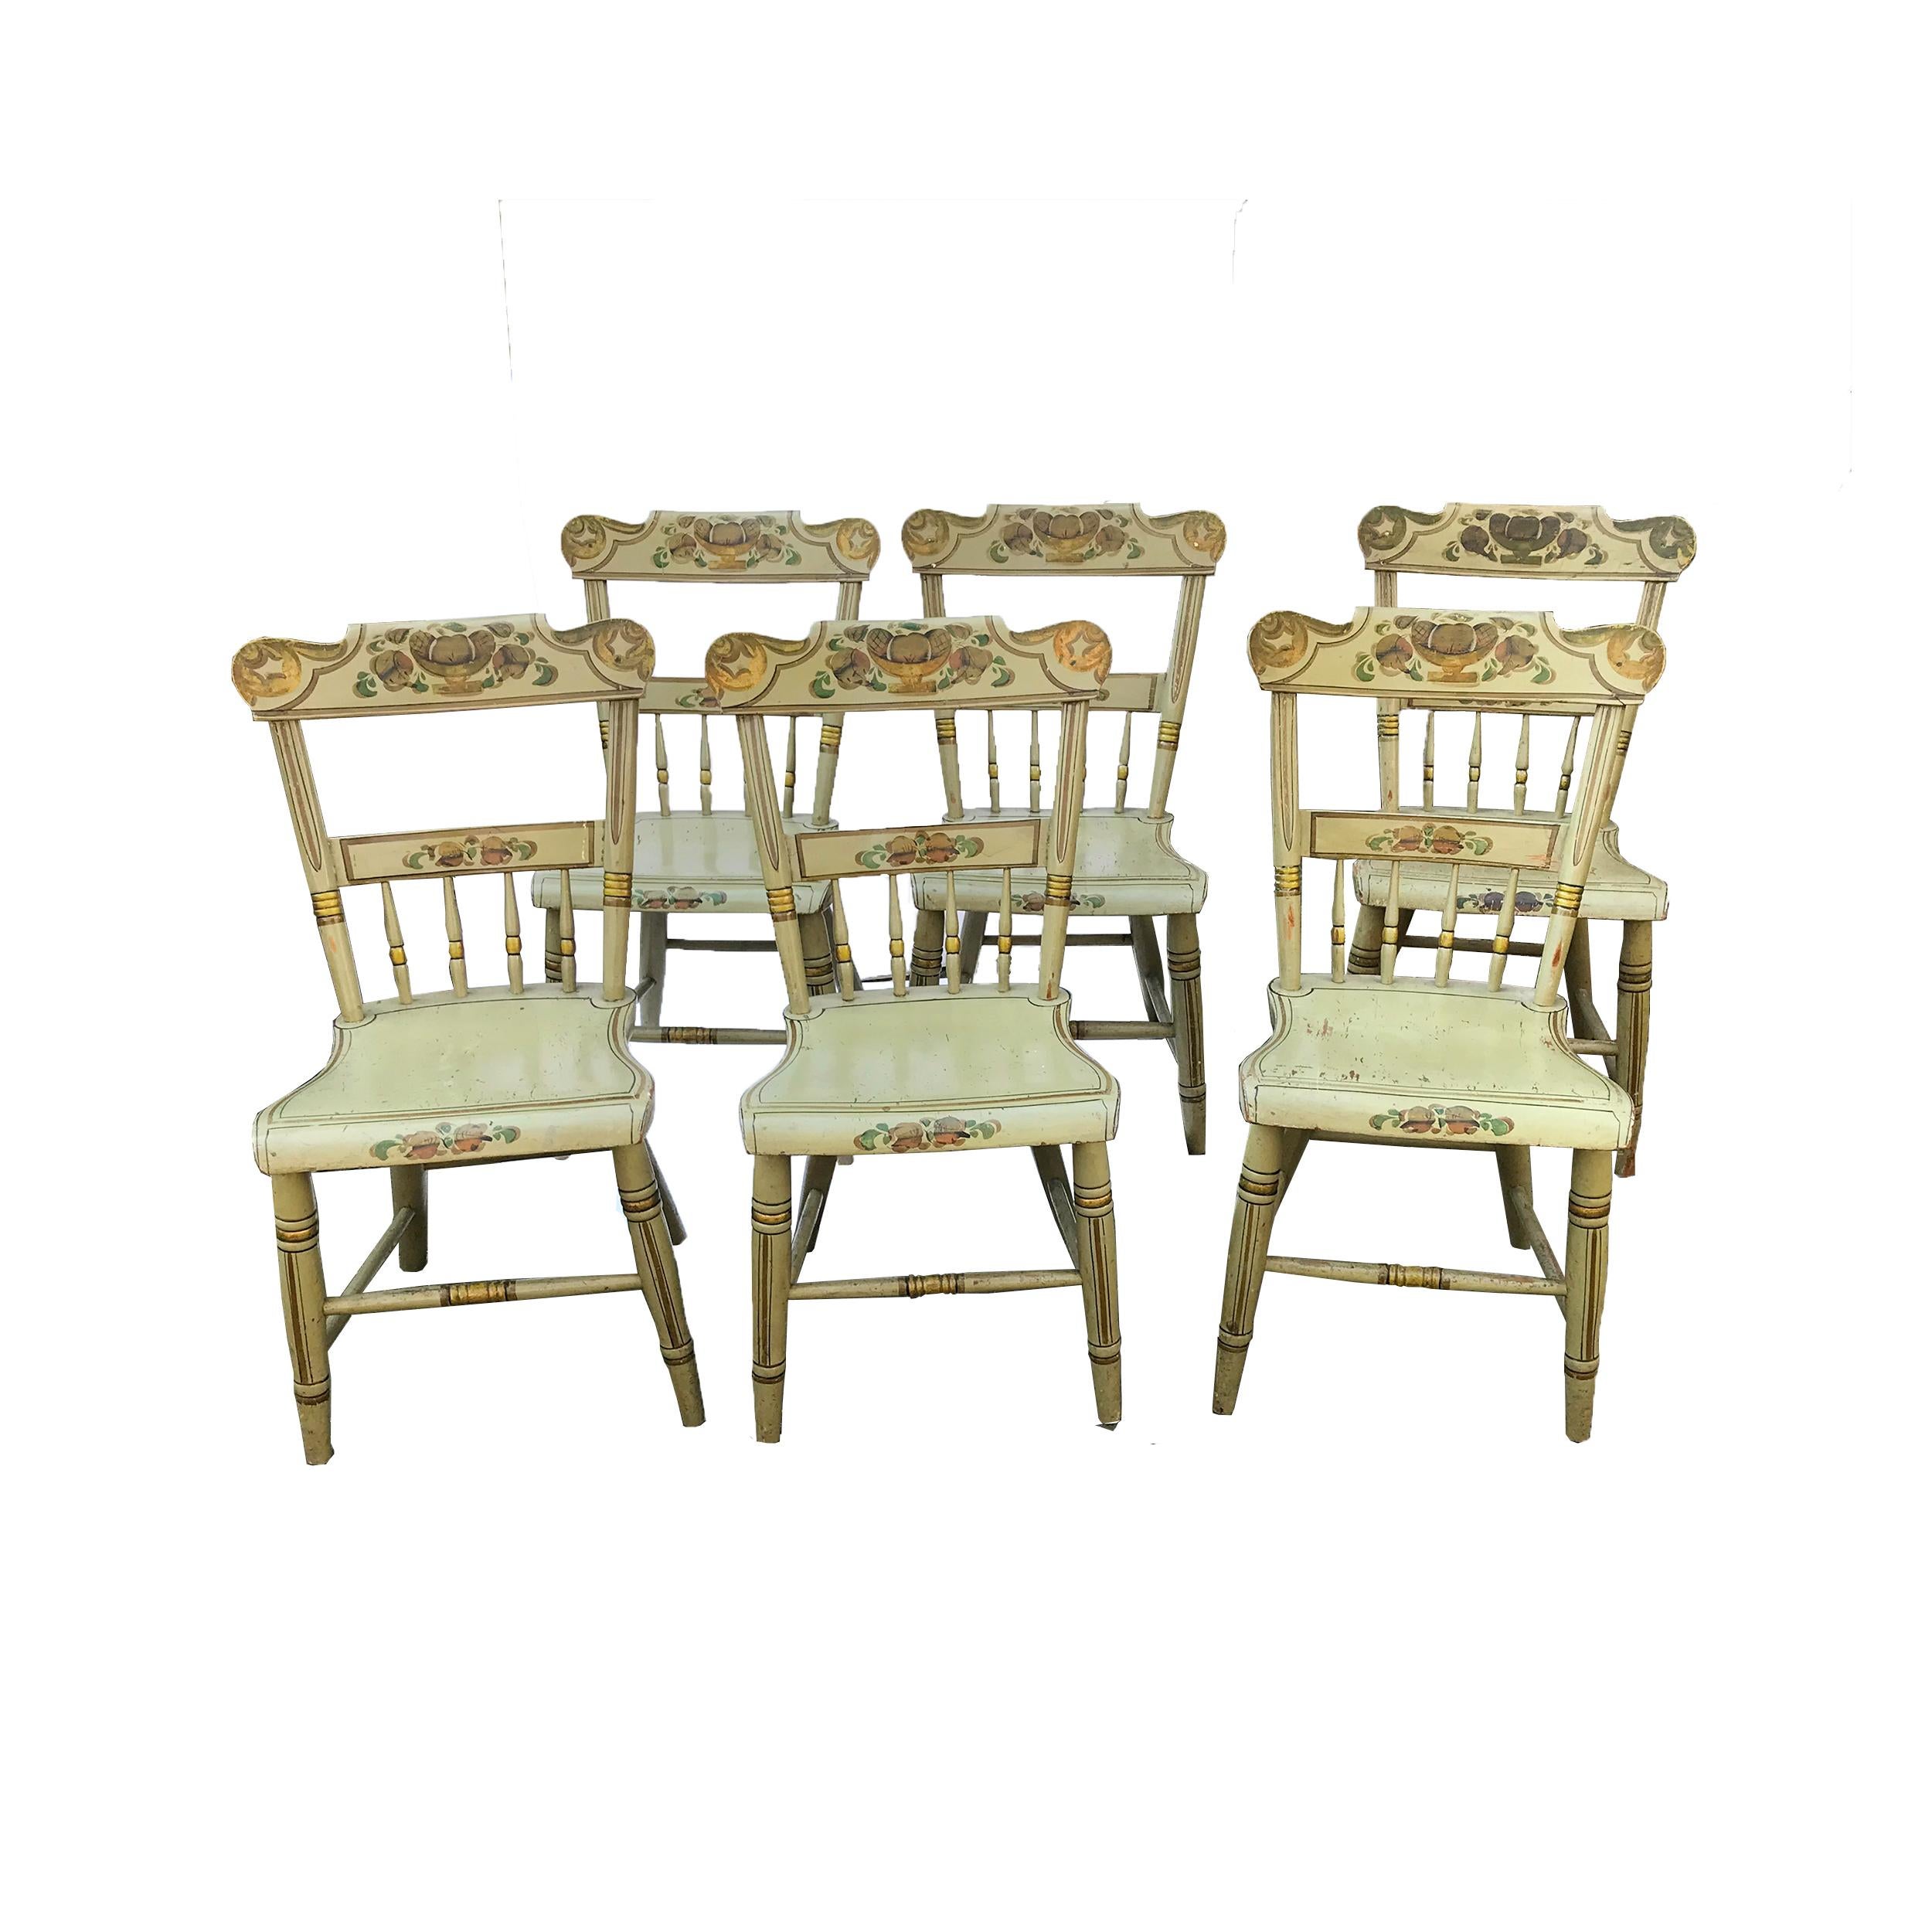 Set of six paint decorated plank seat chairs, each with a rectangular rolled crest rail with half spindle back and shaped plank seat. The cylindrical tapered legs are splayed with a stretcher. The splat, slat and seat rail are decorated with painted